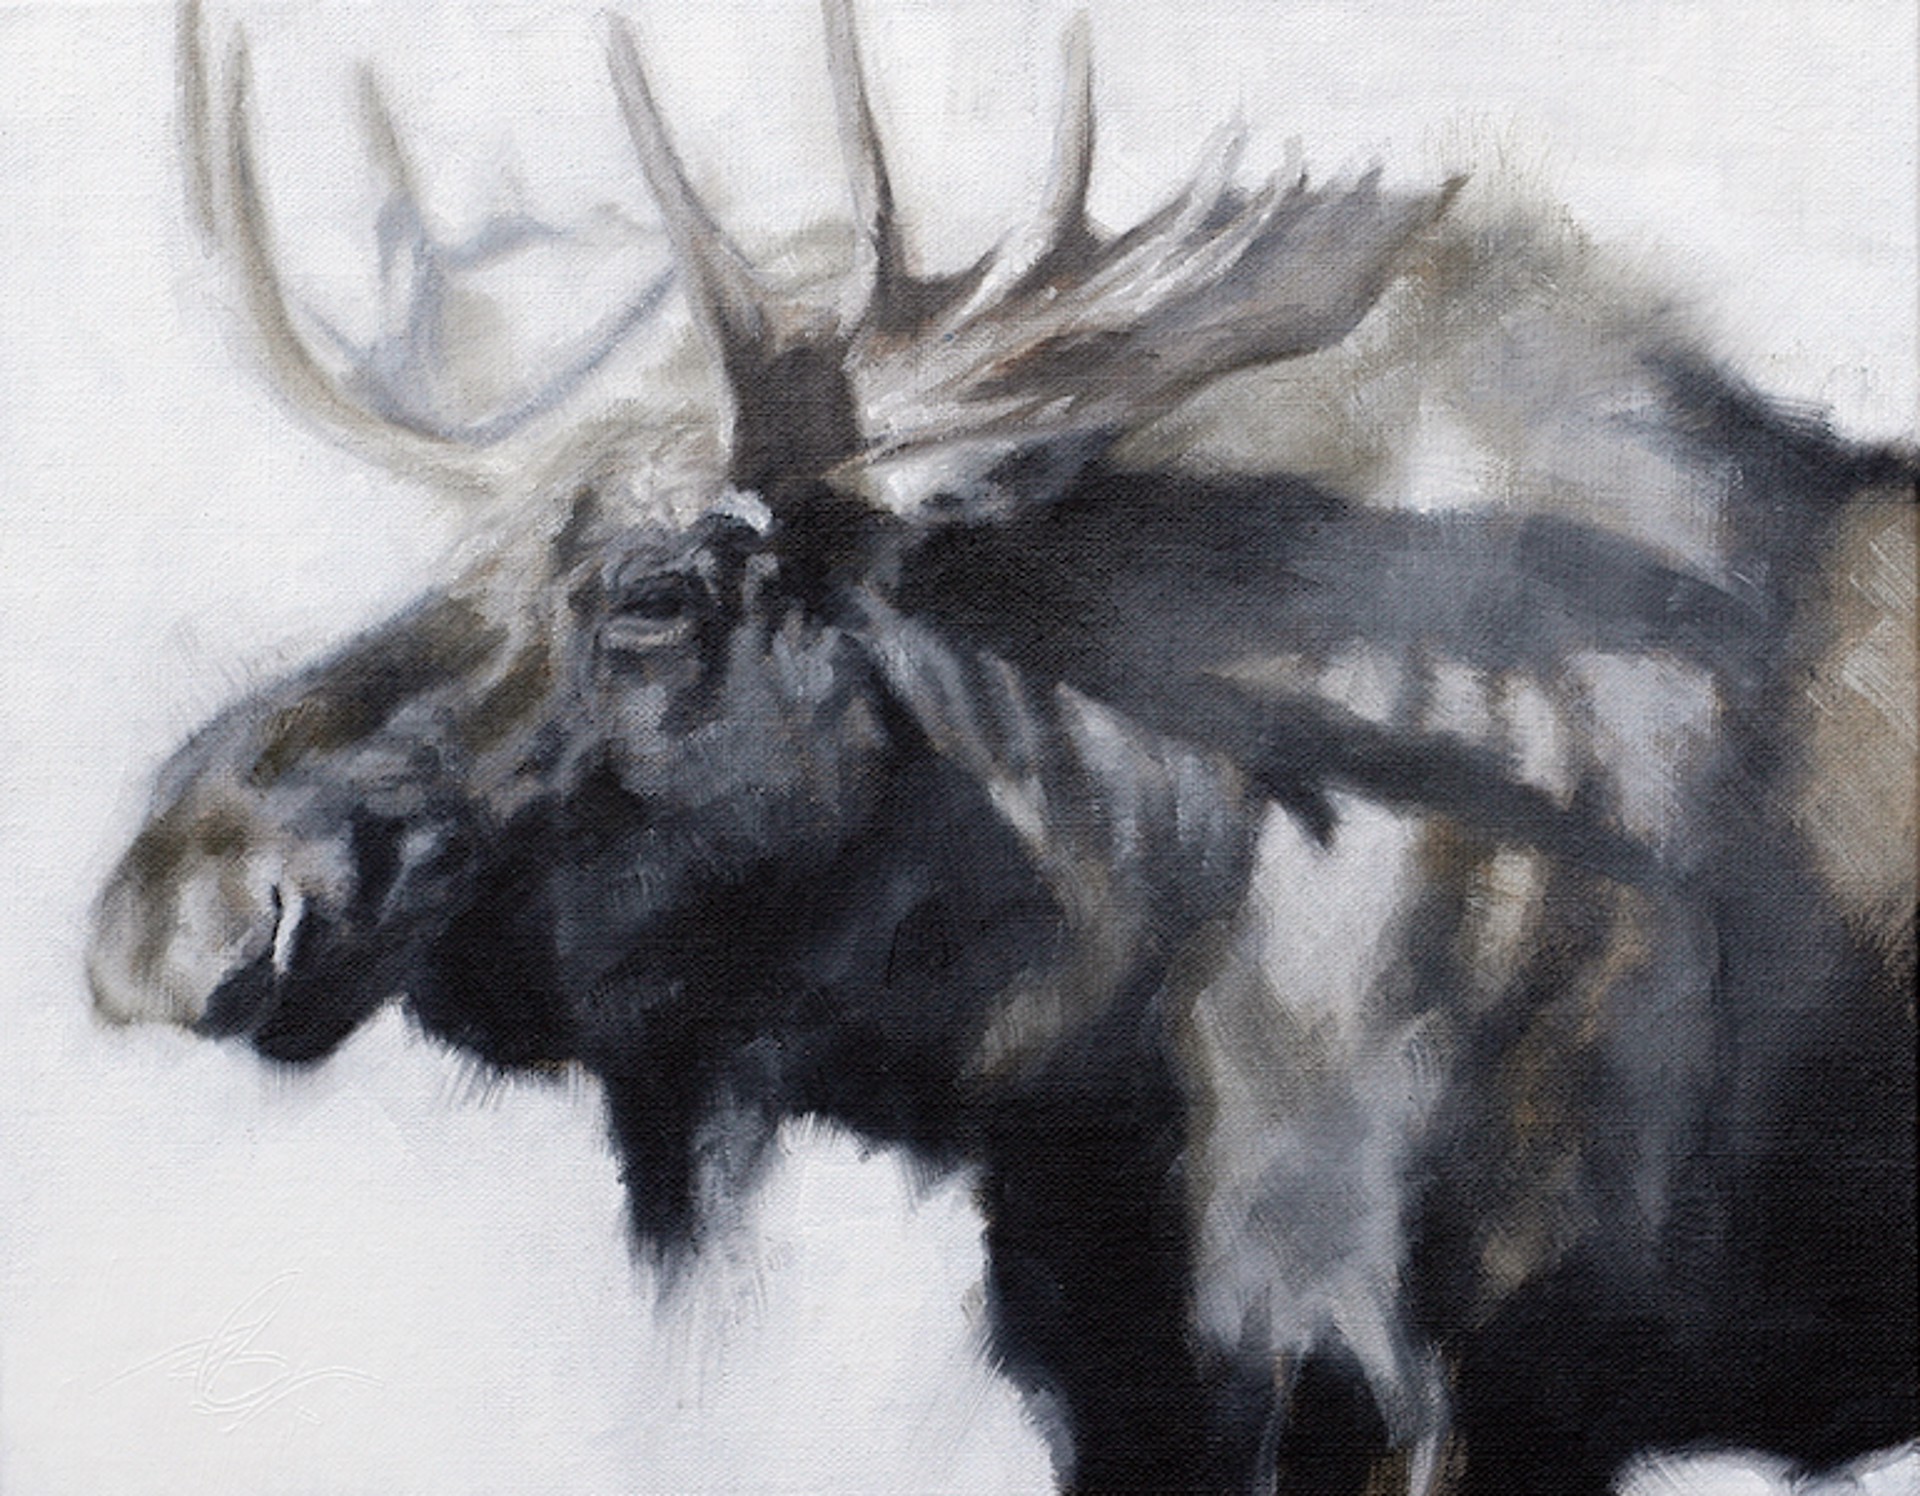 Original Oil Painting Of A Bull Moose Head And Shoulder With A White Background In Grey Scale